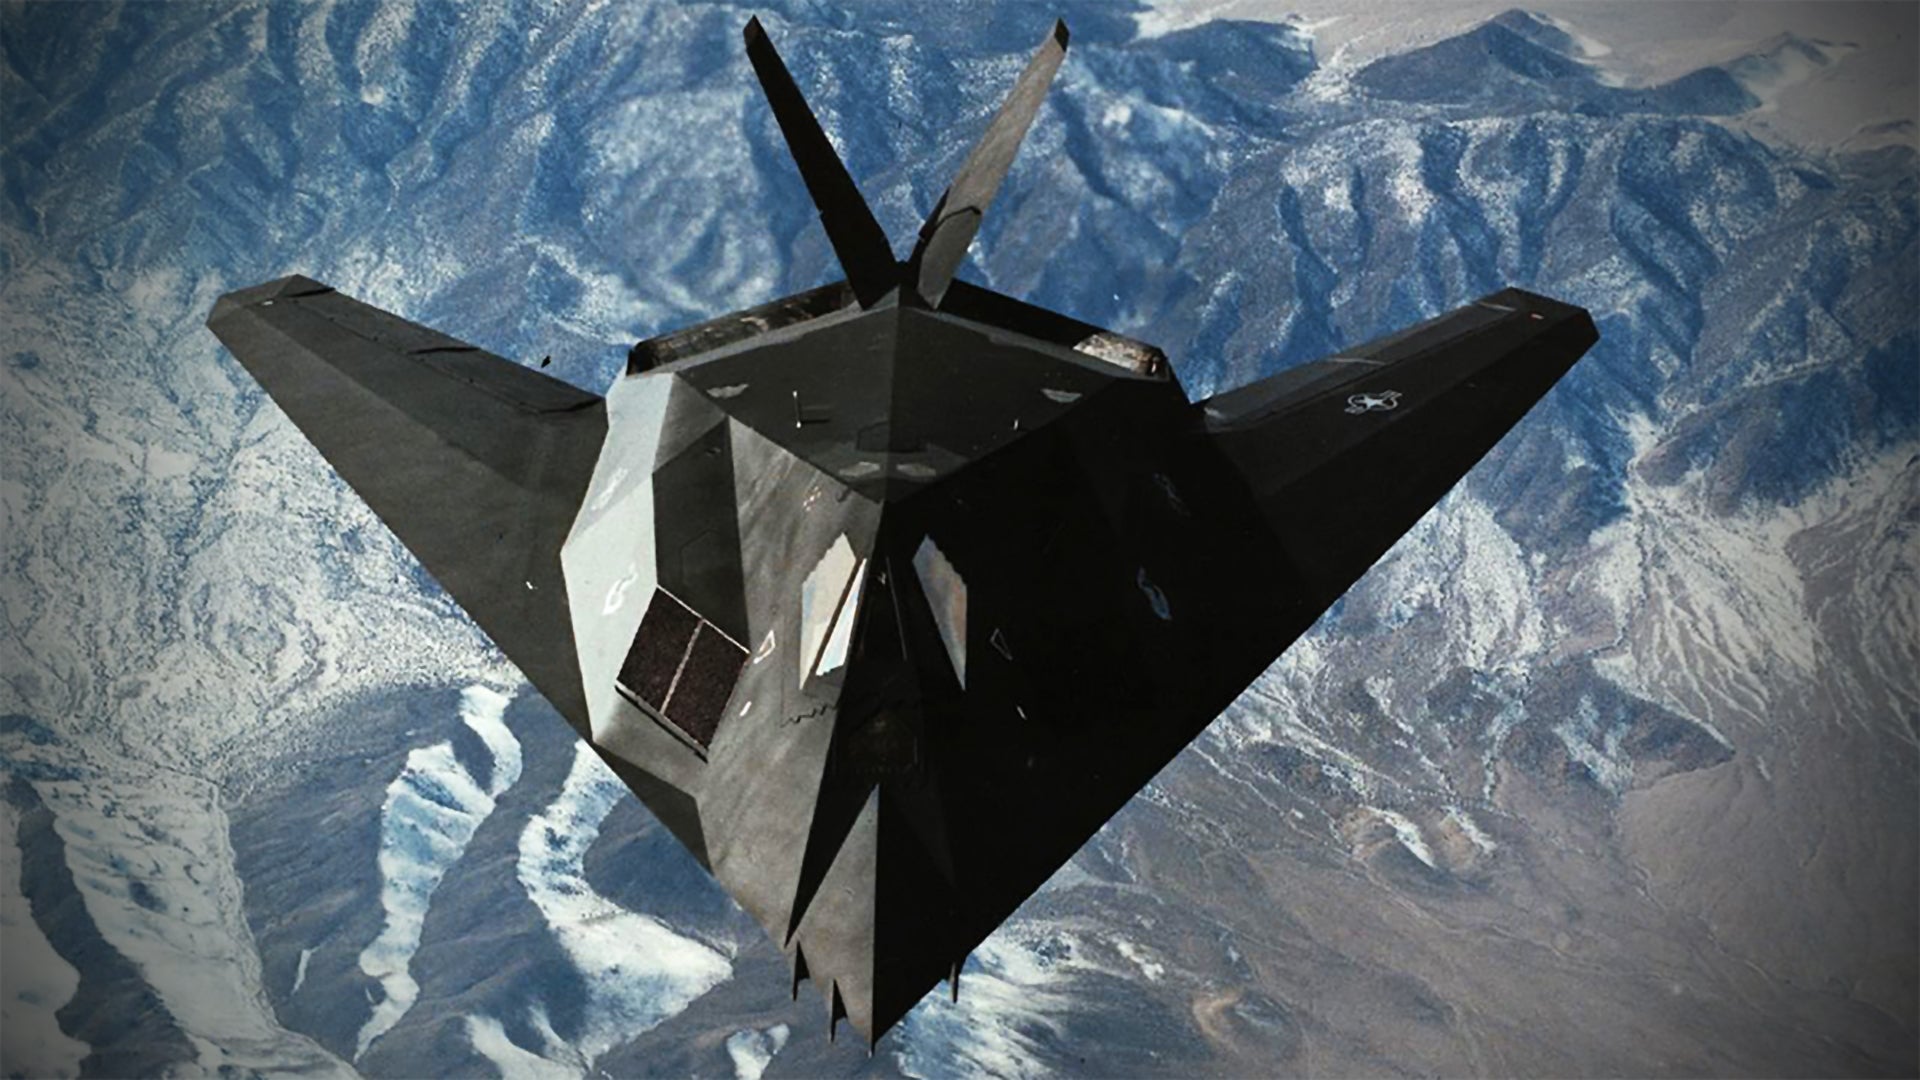 Audio From The 1999 Shoot Down Of F-117 “Vega 31” Over Serbia Is Chilling